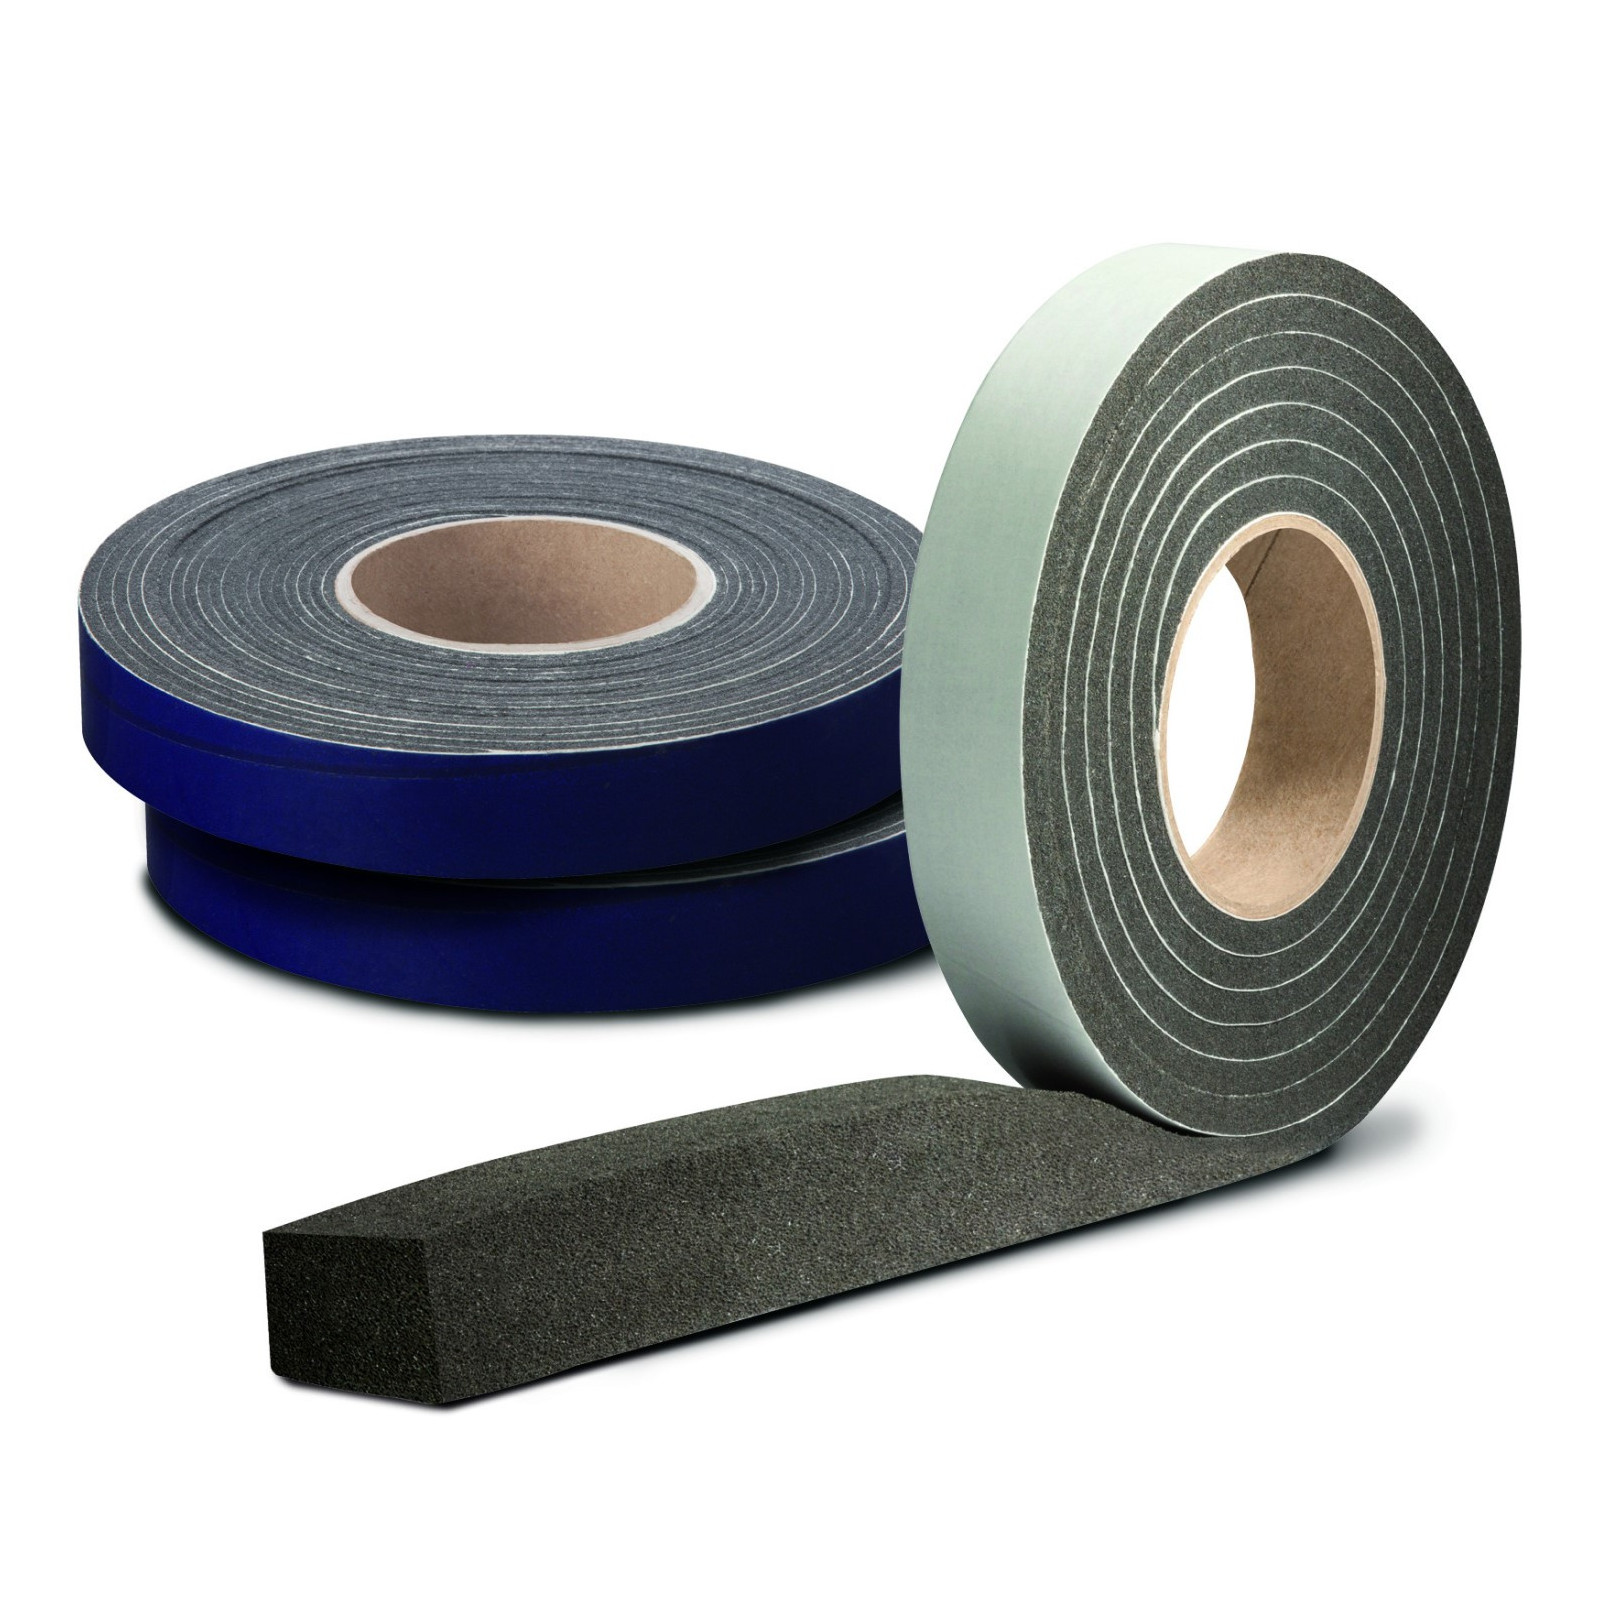 Joint mousse Compriband TRS® Rlx 3,3 M - 20MM - Expansion 07>18MM